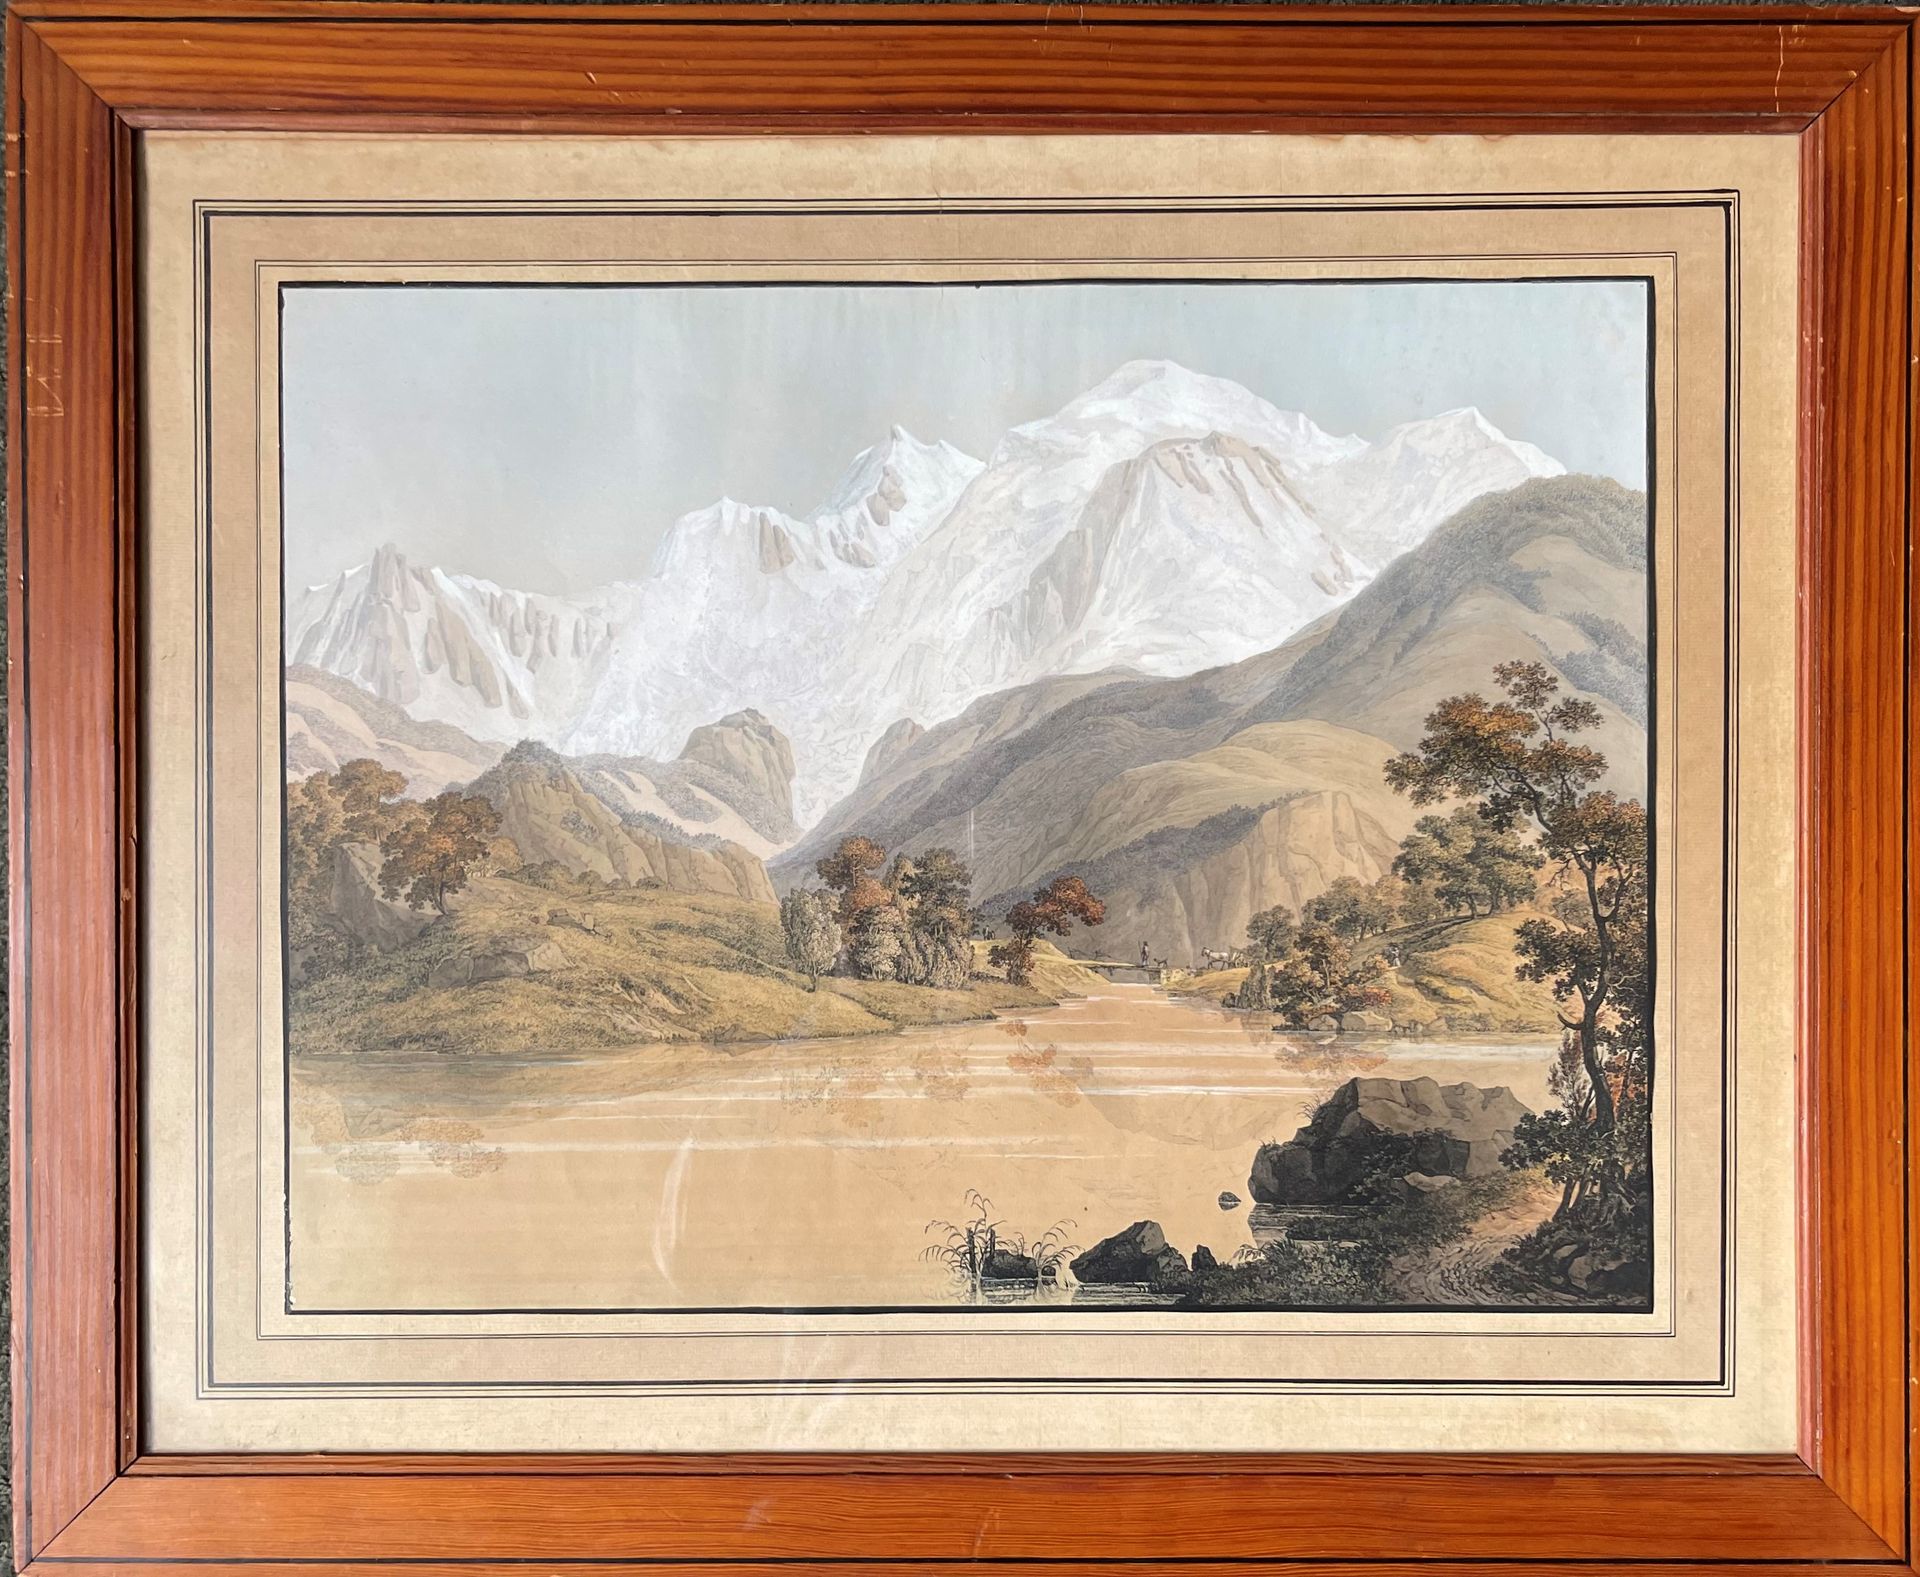 Null Jean Antoine LINCK (1766-1843)

The Mont-Blanc from the lake of Chède

Wate&hellip;